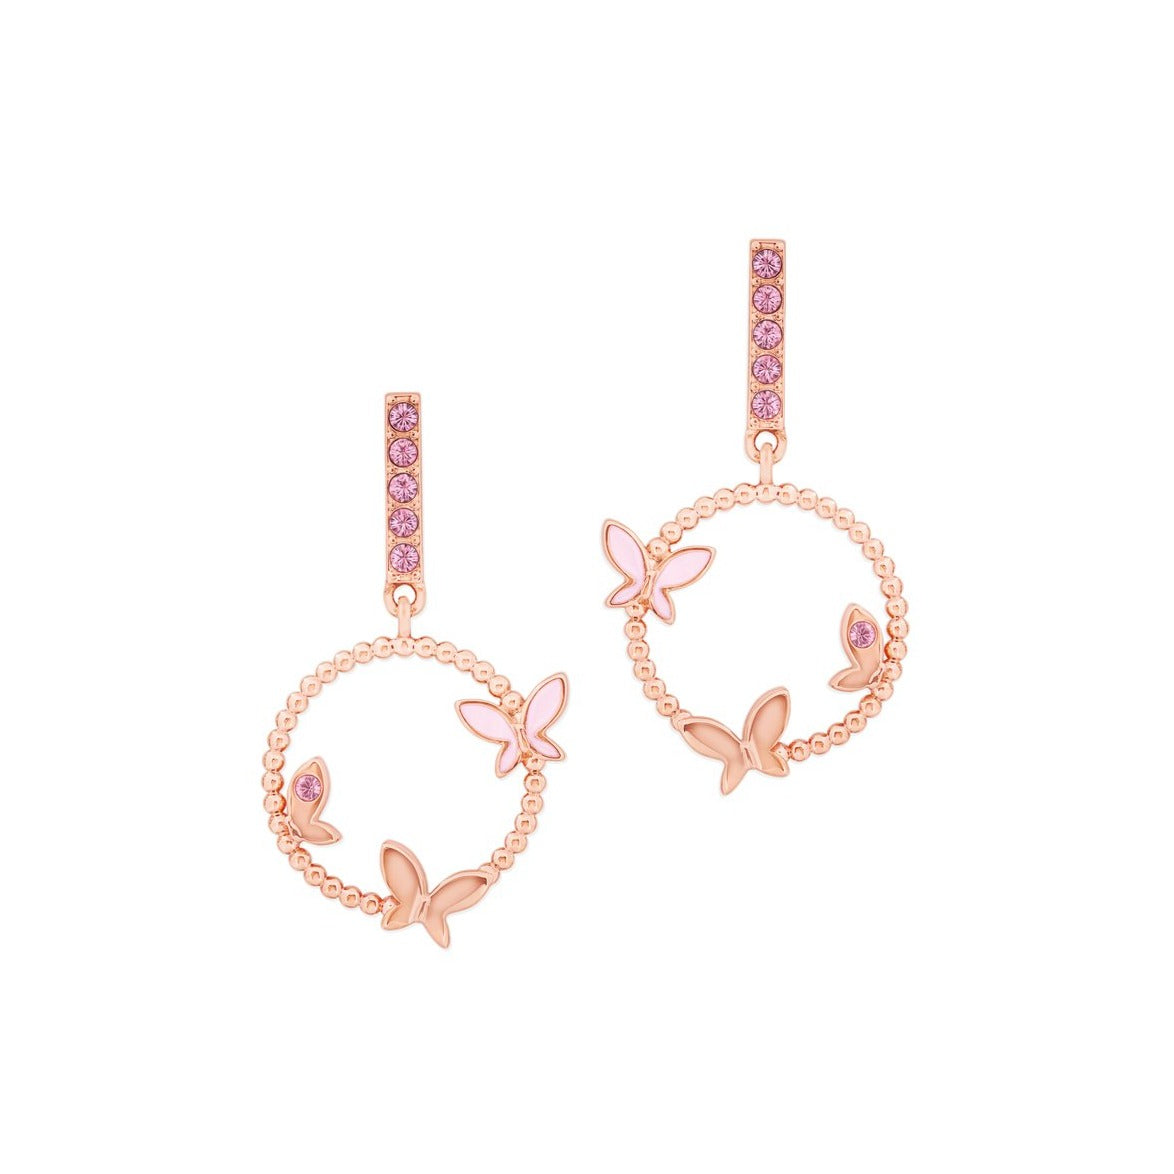 Tipperary Crystal Butterfly Circle Drop Earrings  Drawing inspiration from urban garden, the Tipperary Crystal Butterfly collection transforms an icon into something modern and unexpected.